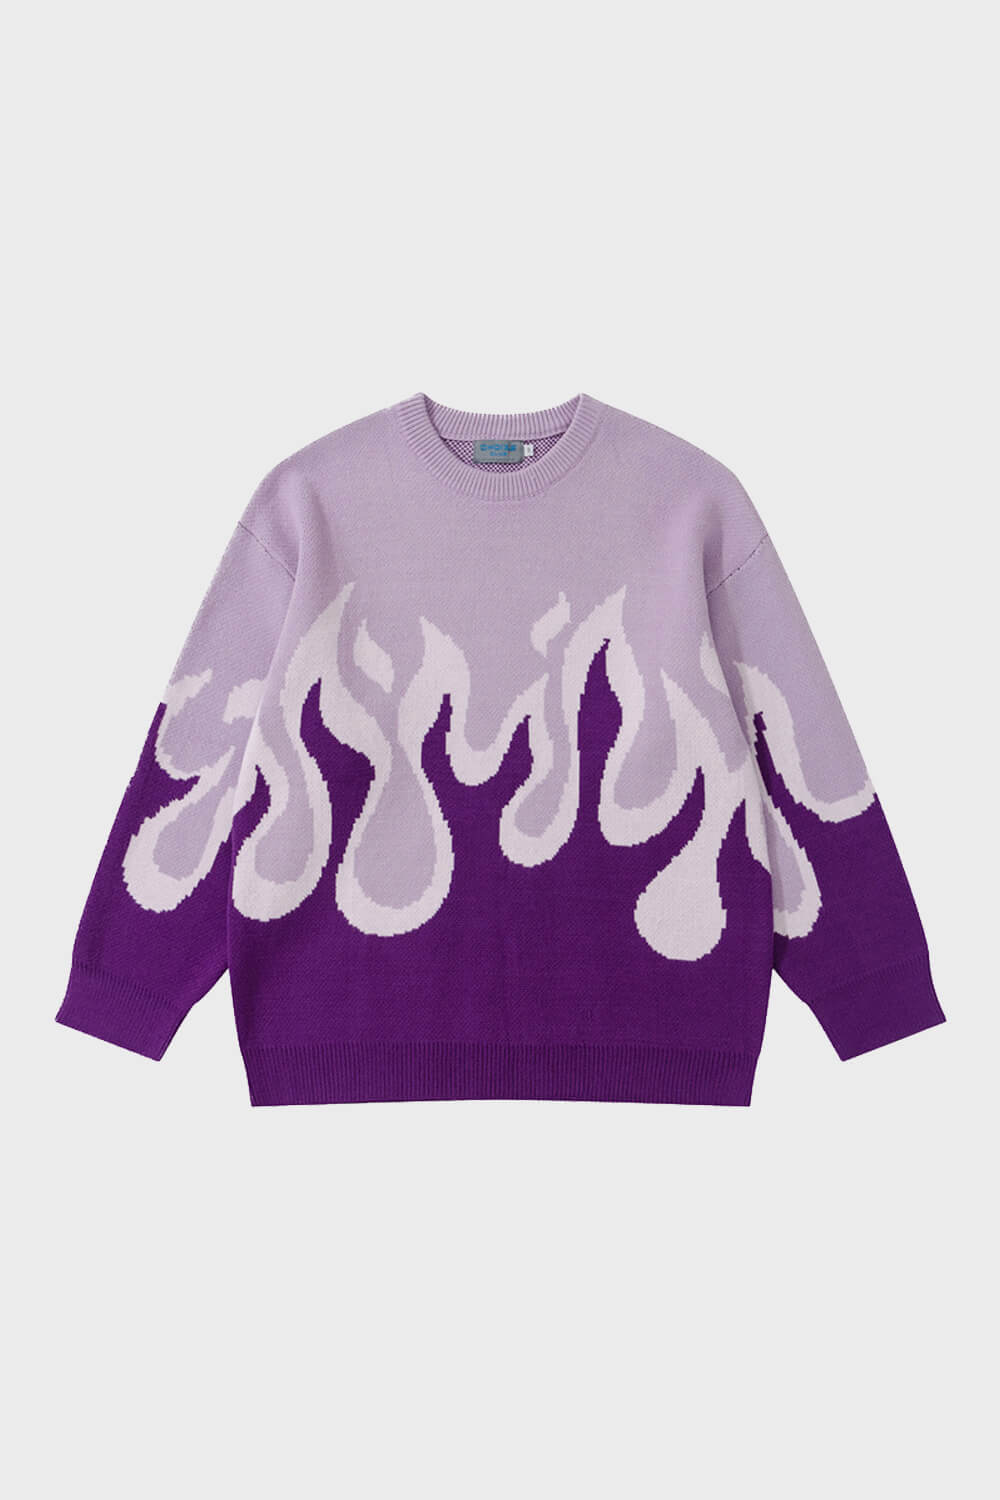 Pink Fire Knitted Aesthetic Sweater